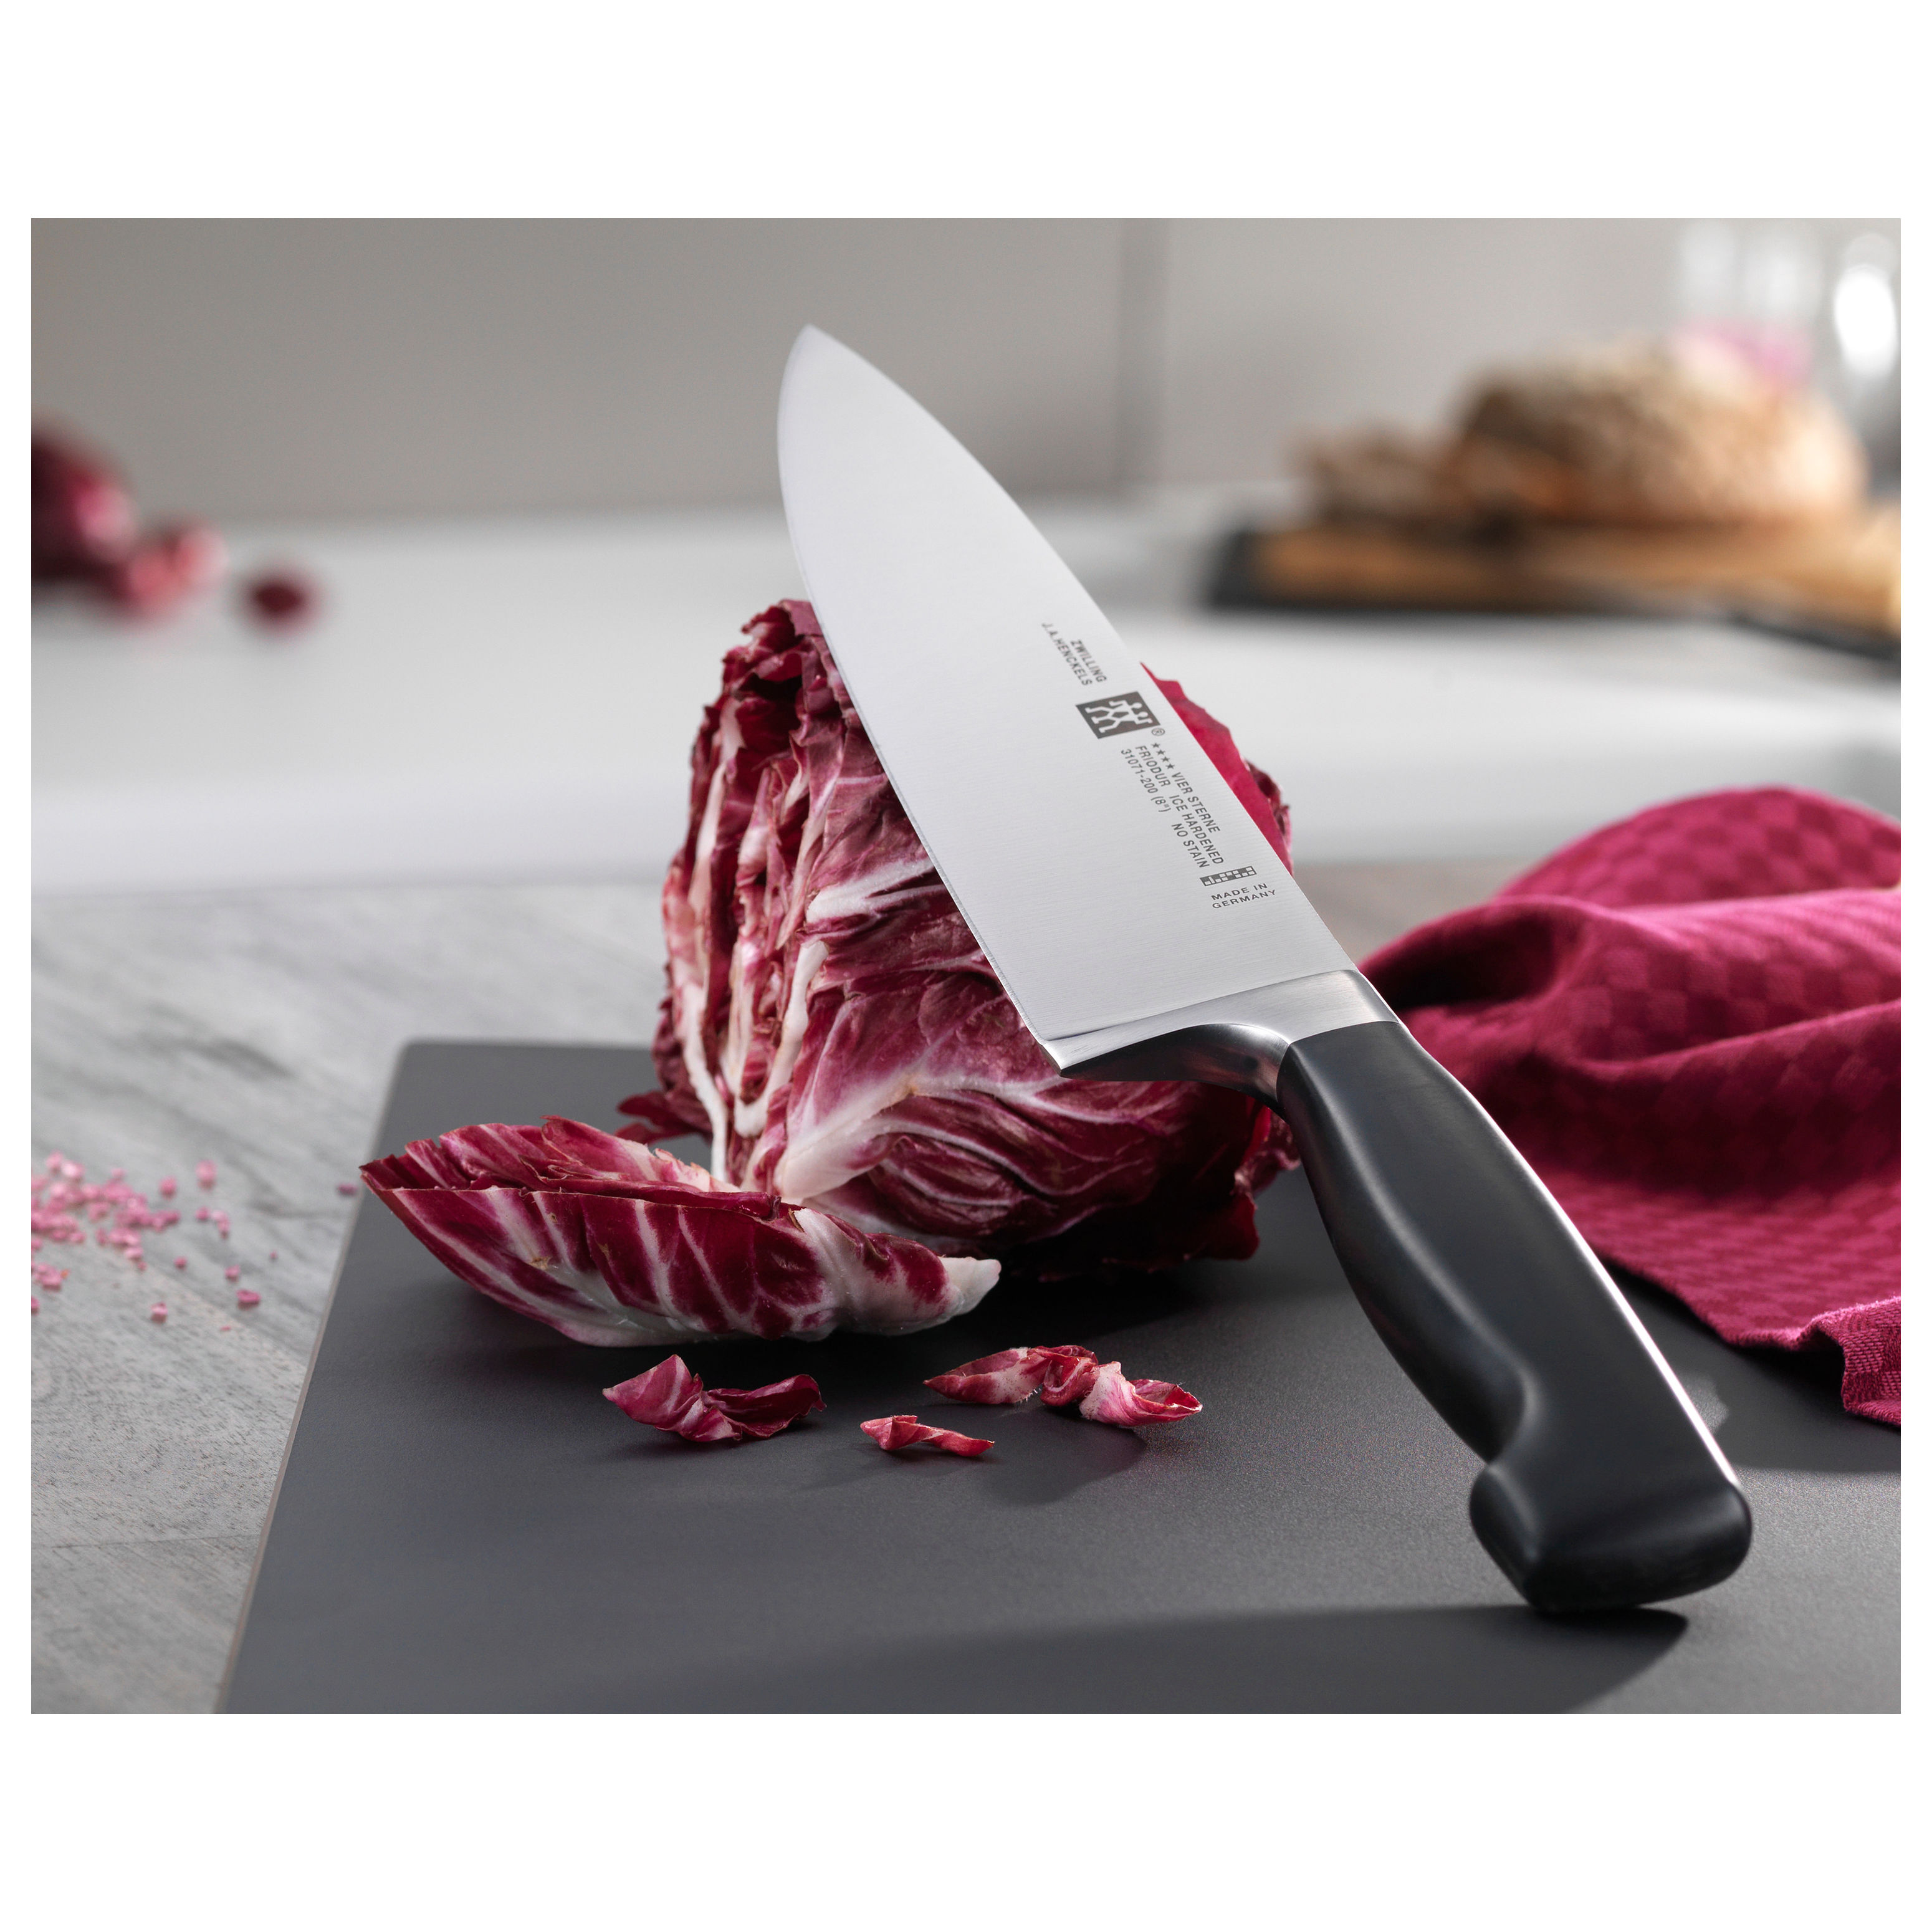 Zwilling J.A. Henckels Four Star 6 Chef's Knife